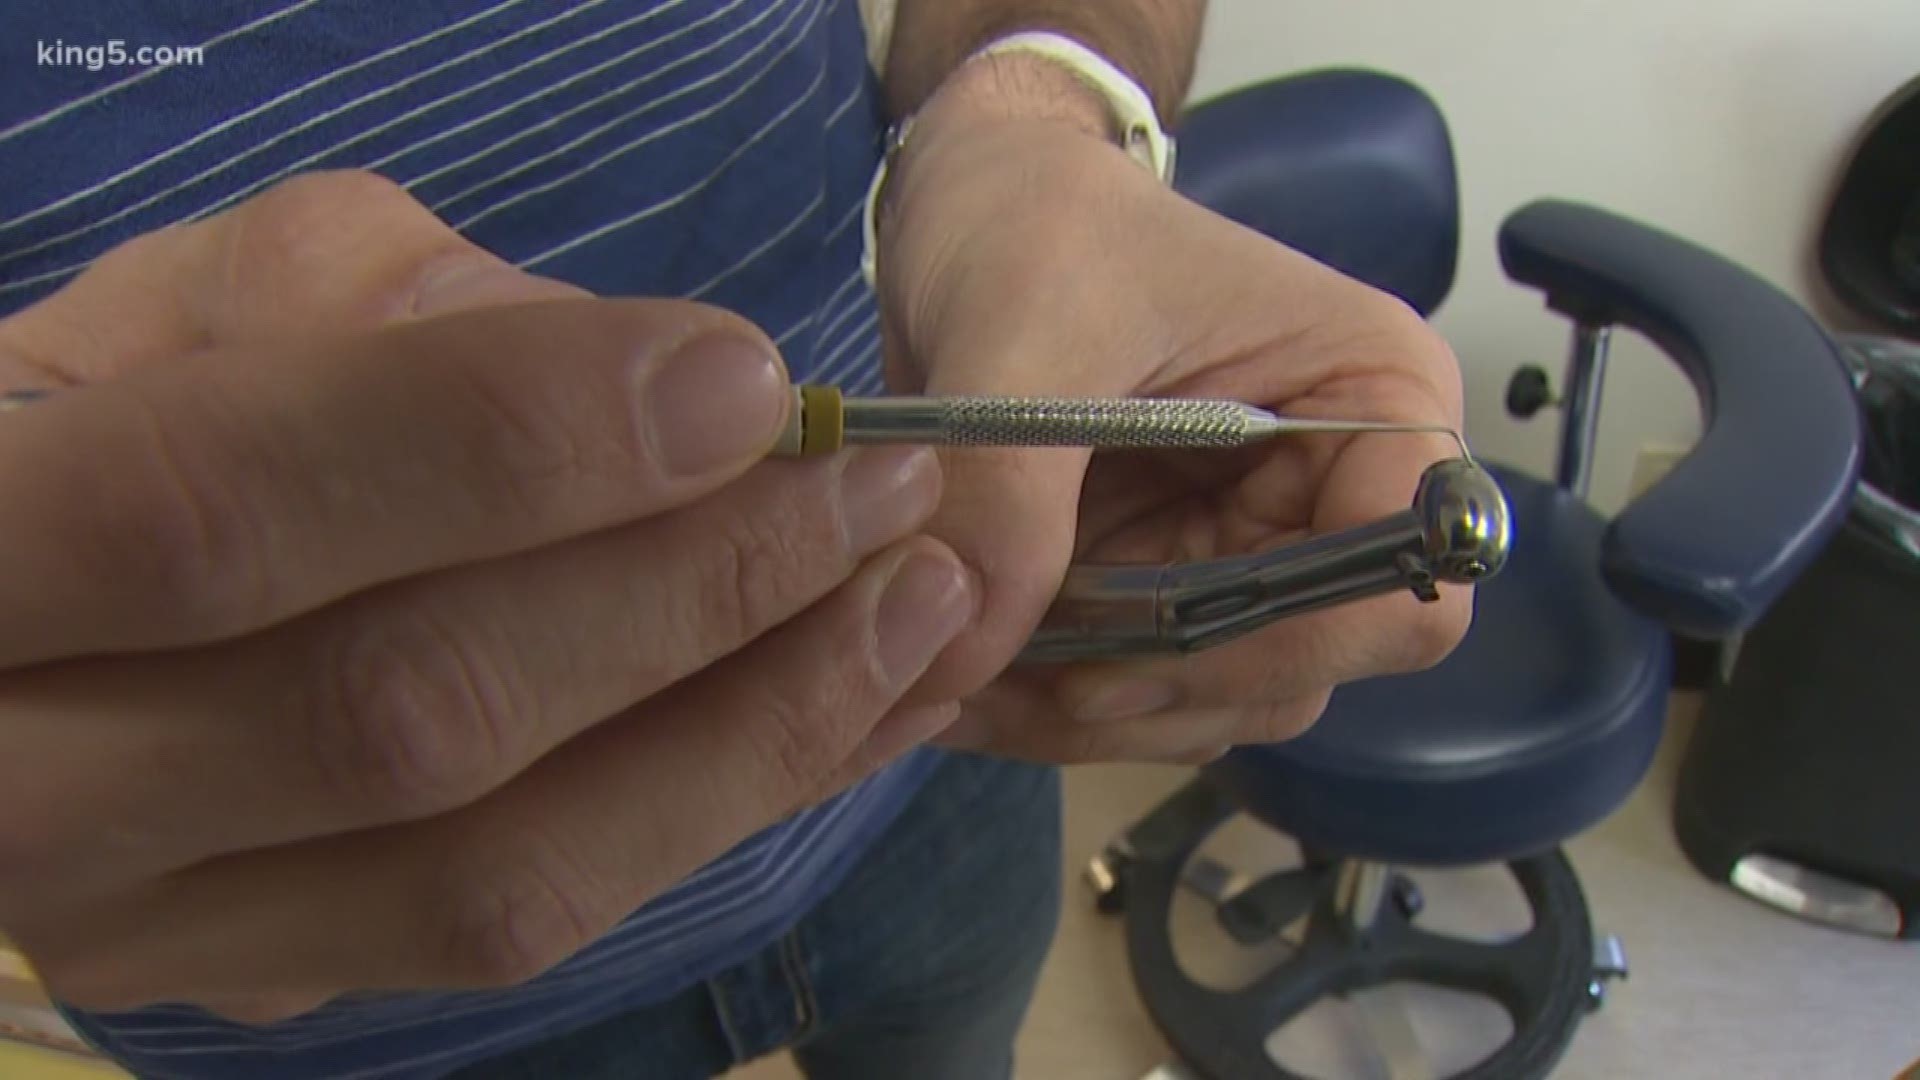 More than 1,200 people are being warned to get tested for hepatitis and HIV, after a dental clinic realized it wasn't properly sterilizing tools used in schools. Neighborcare says it believes the risk of infection is low, but students should get tested anyway. KING 5's Michael Crowe reports.